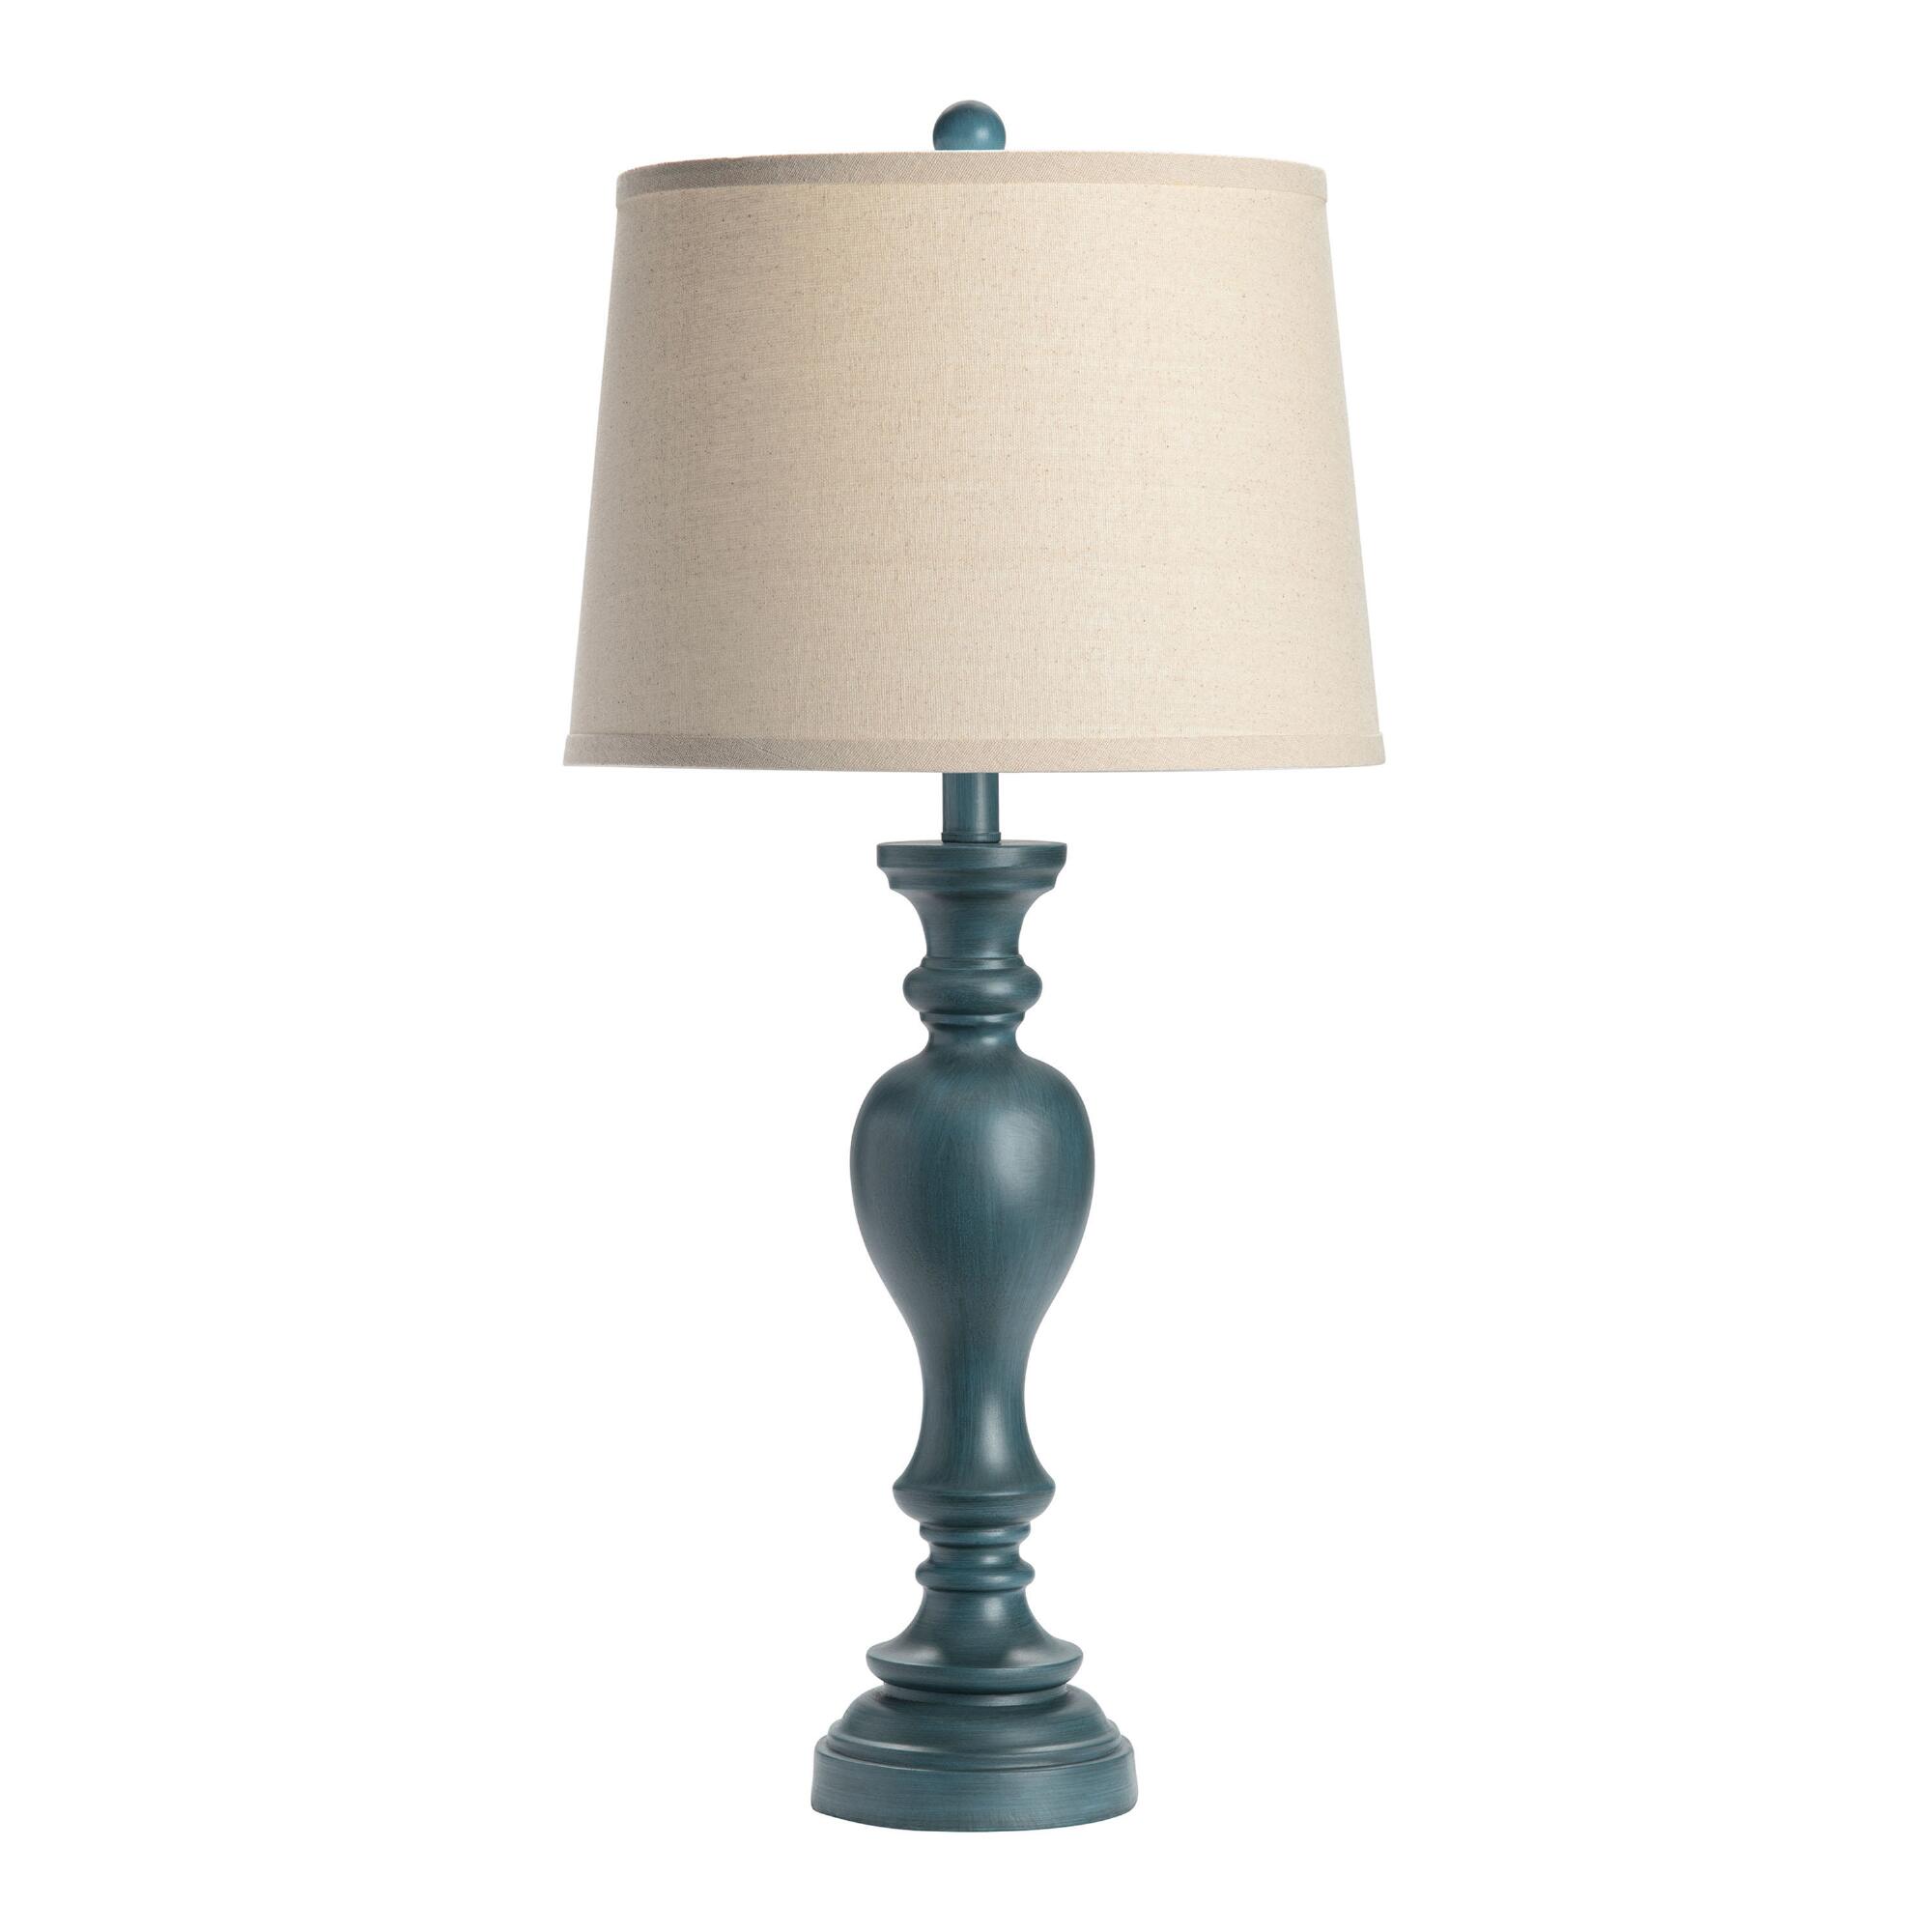 Distressed Turquoise Turned Milton Table Lamp: Blue by World Market